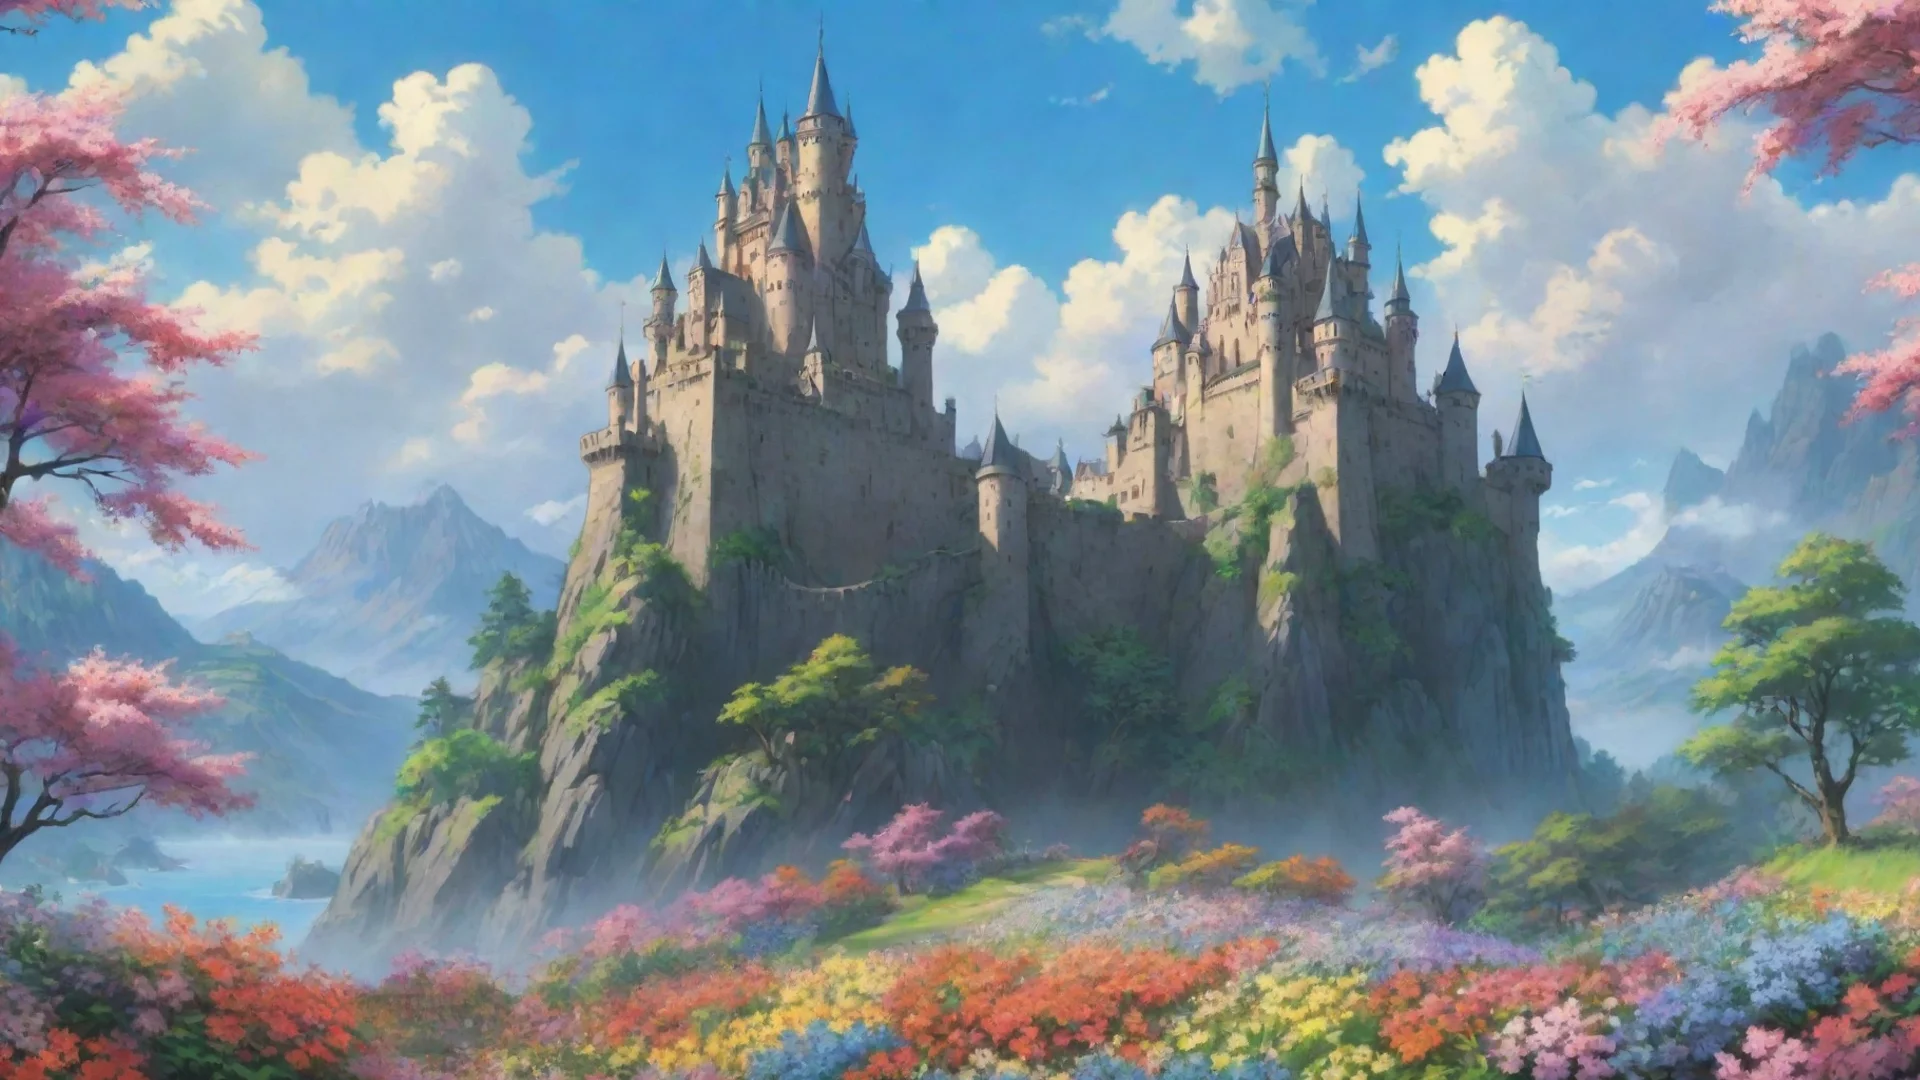 aiamazing amazing anime ghibli hd environment beautiful castle flowers colors awesome portrait 2 wide